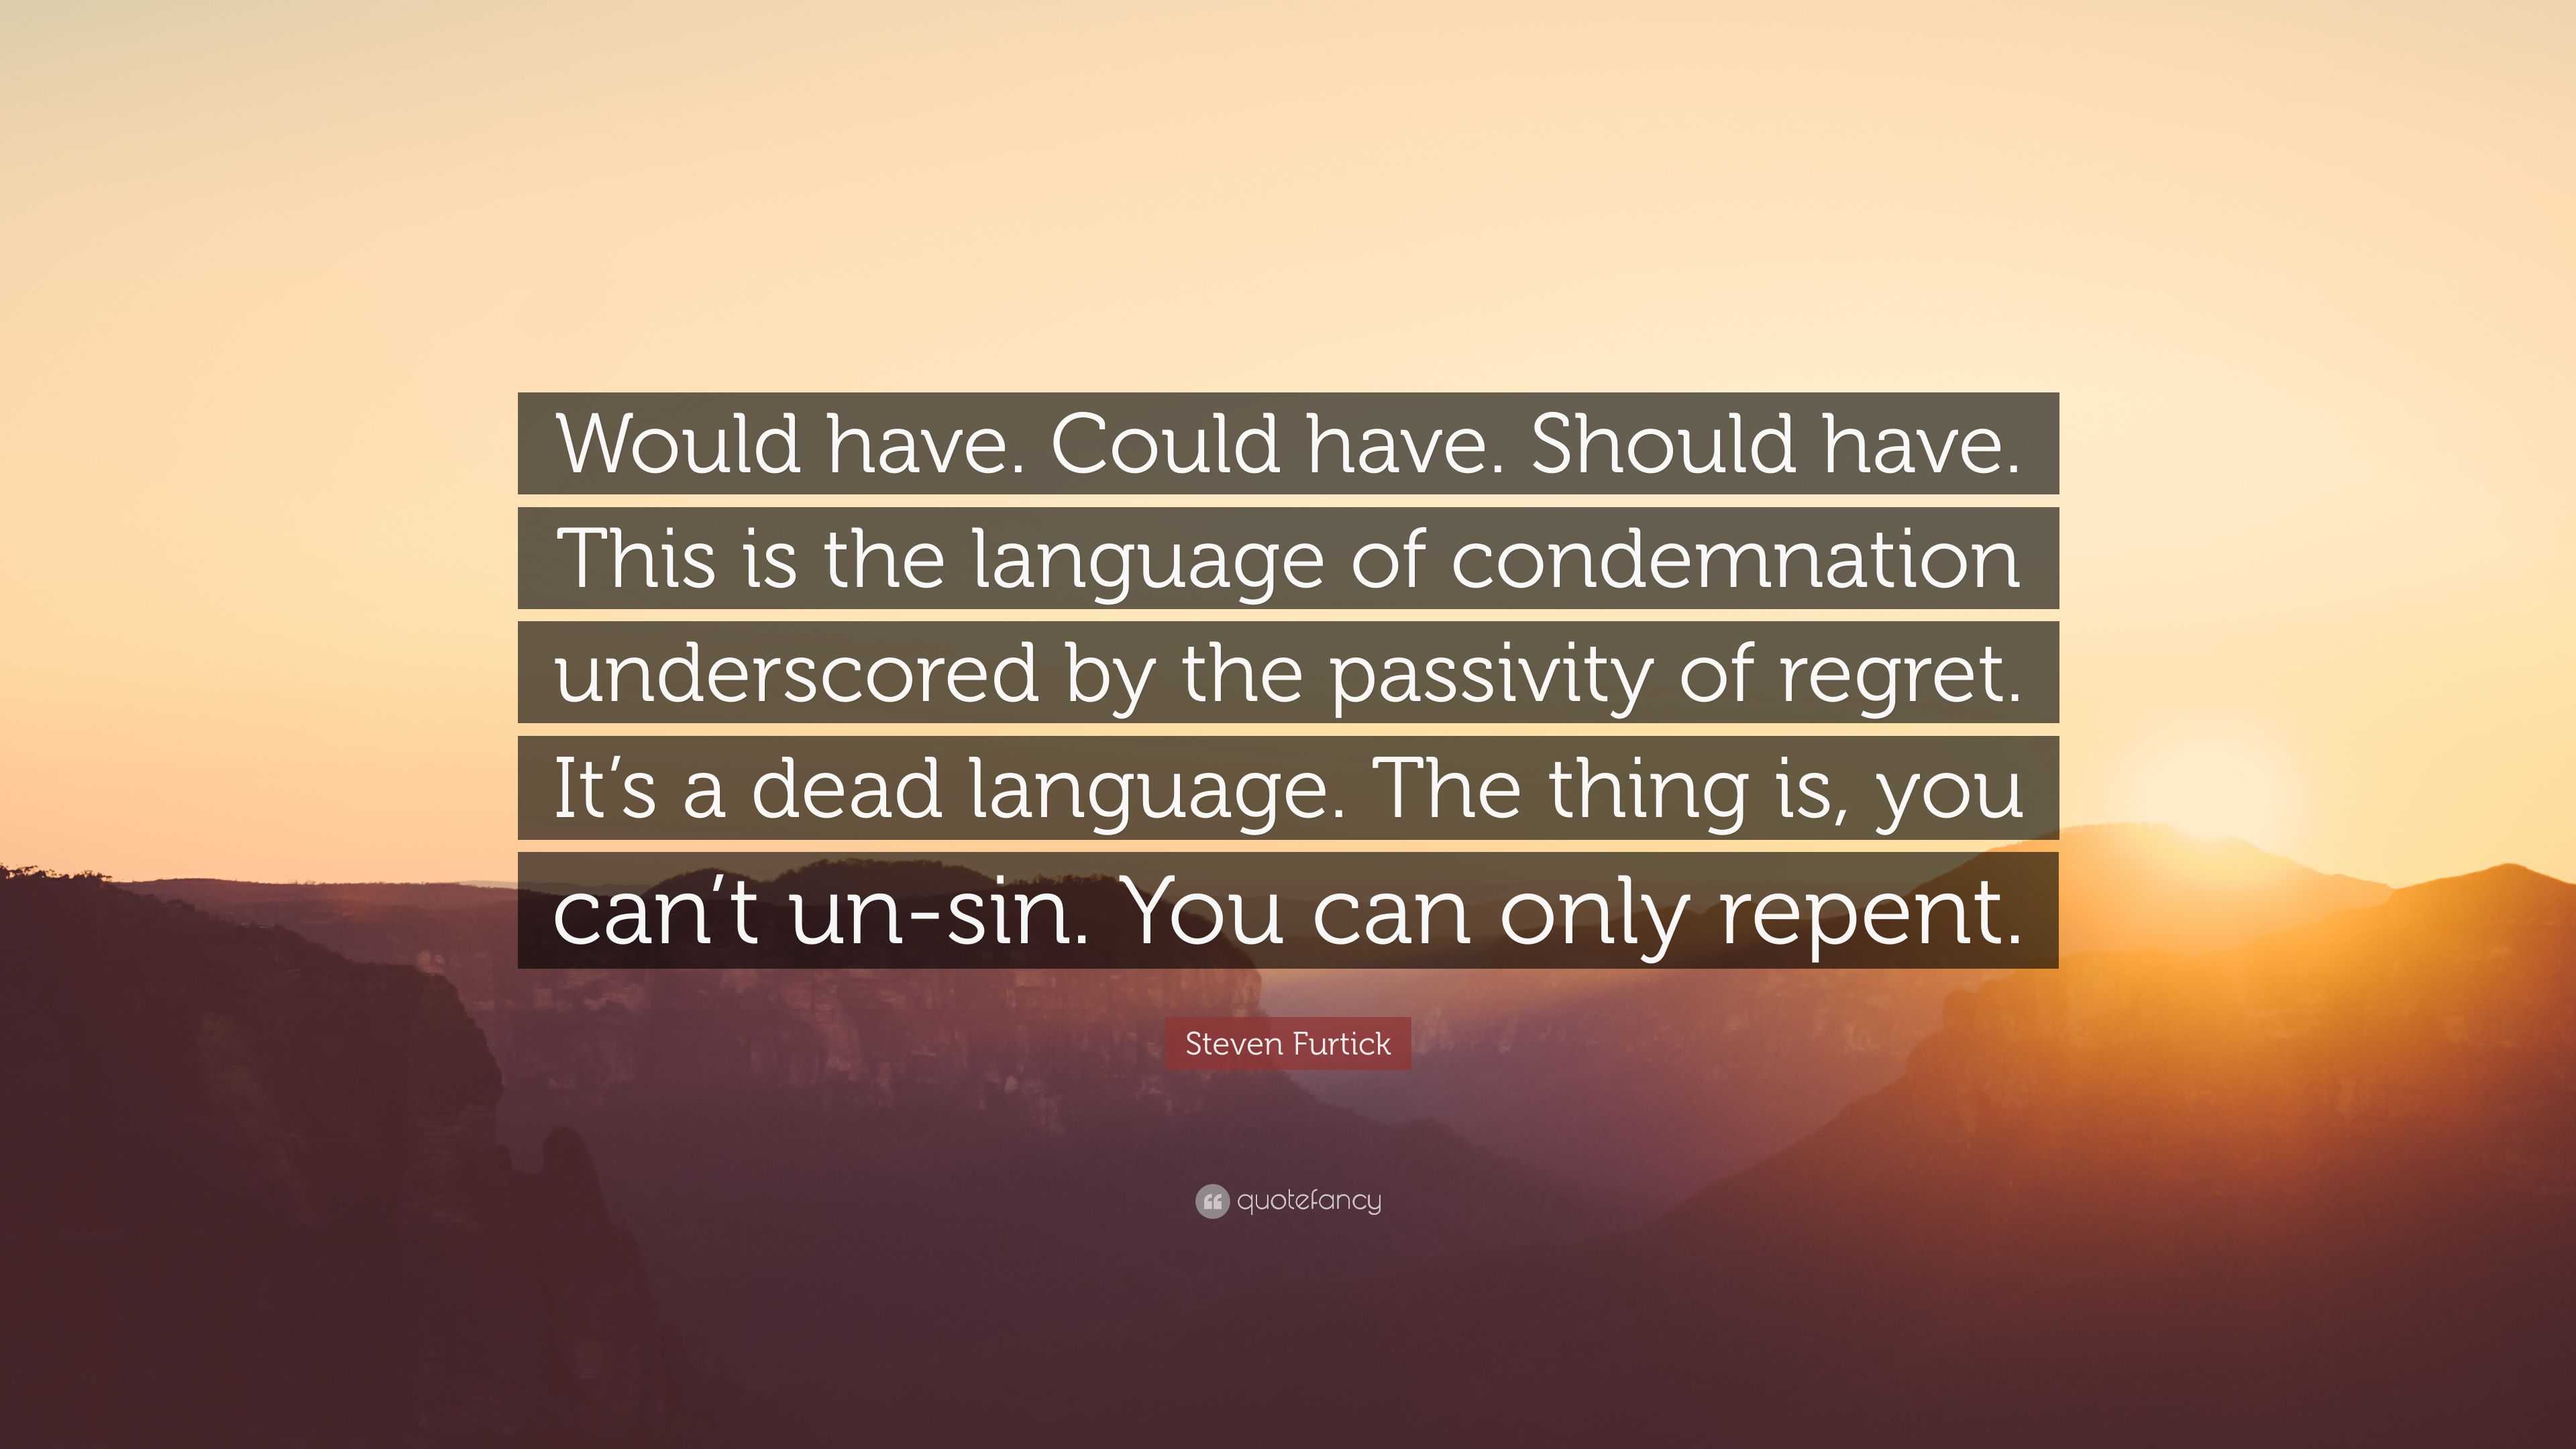 Steven Furtick Quote: “Would have. Could have. Should have. This is the  language of condemnation underscored by the passivity of regret. It's a”